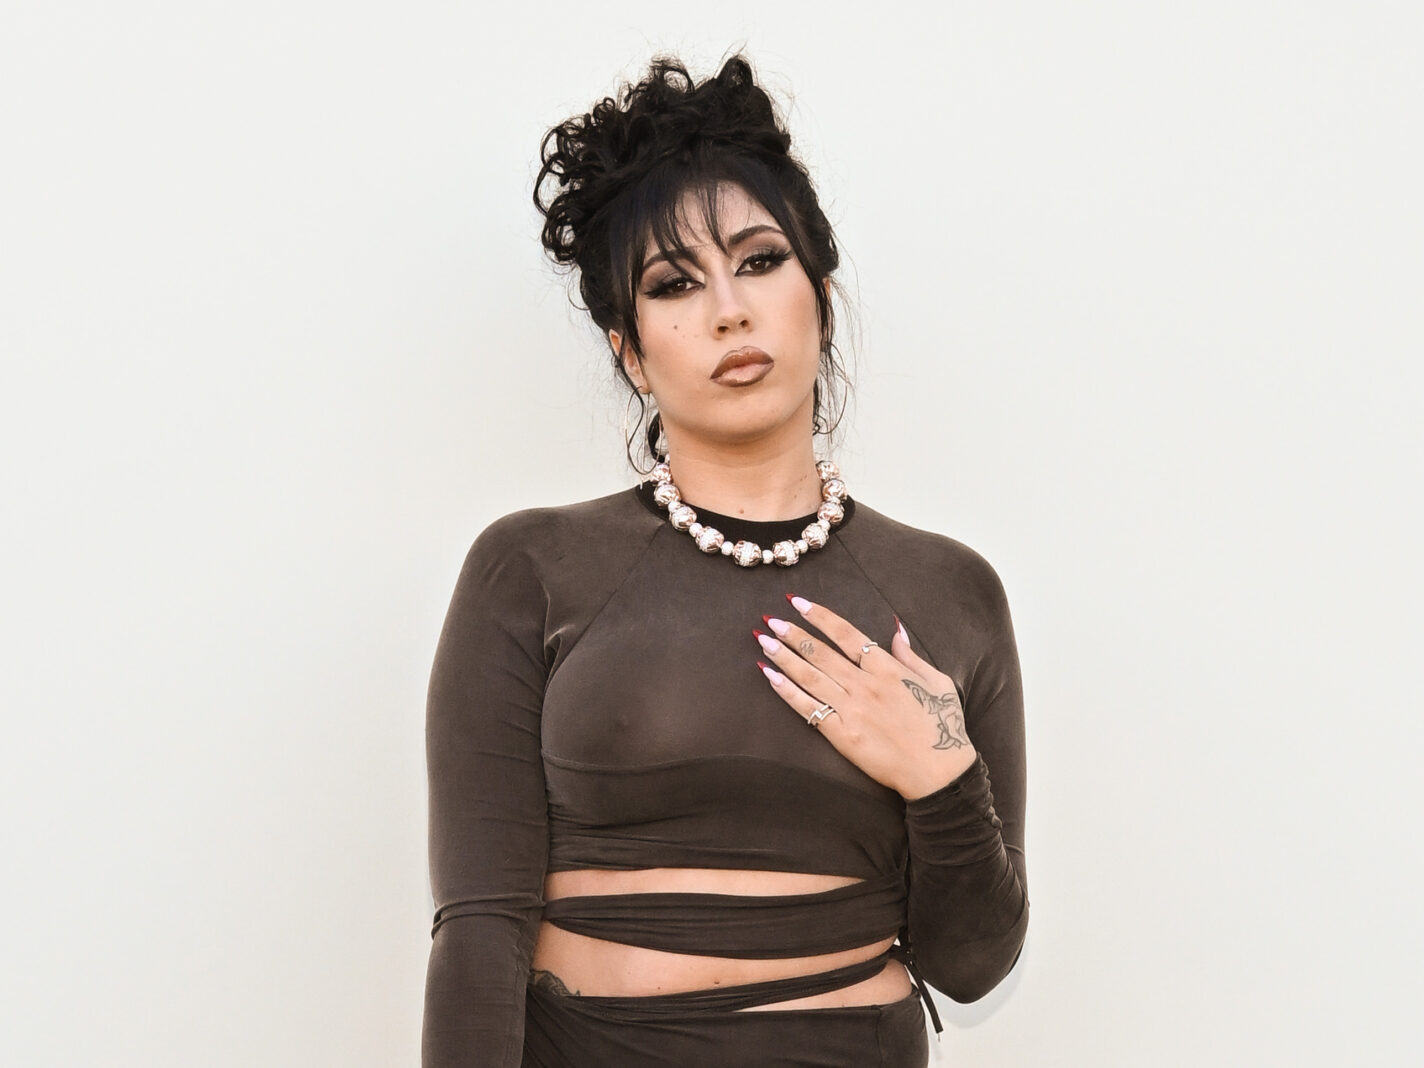 Kali Uchis Enlists El Alfa & City Girls’ JT for Upcoming New Song